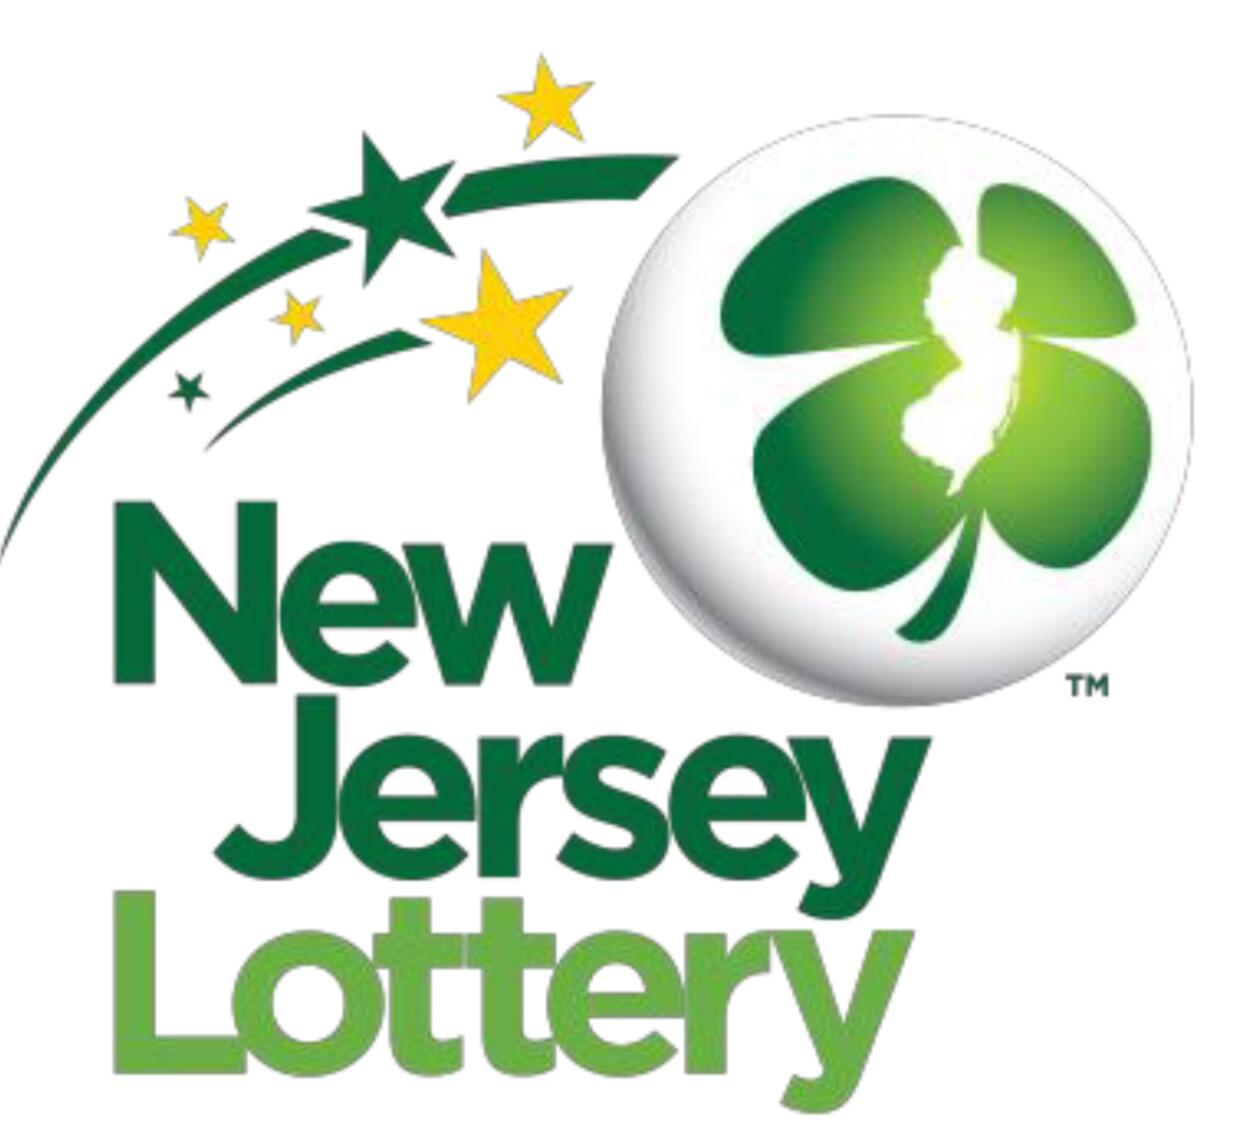 new jersey midday pick 4 lottery results